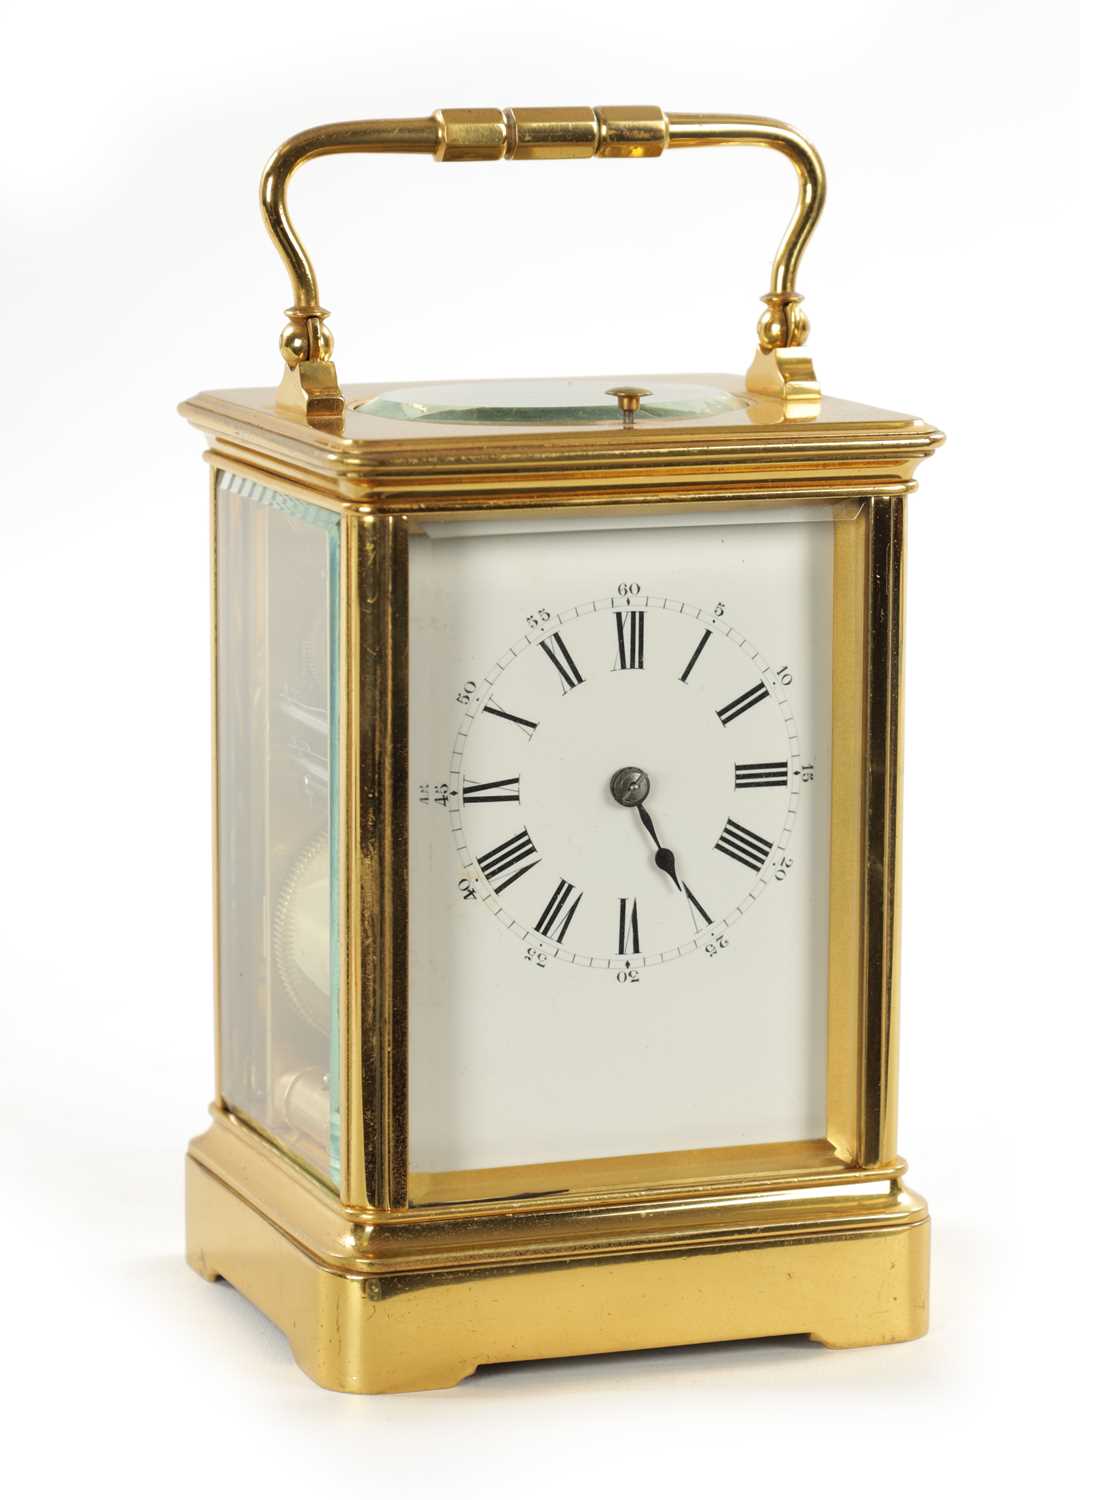 A LATE 19TH CENTURY FRENCH GRAND SONNERIE REPEATING CARRIAGE CLOCK